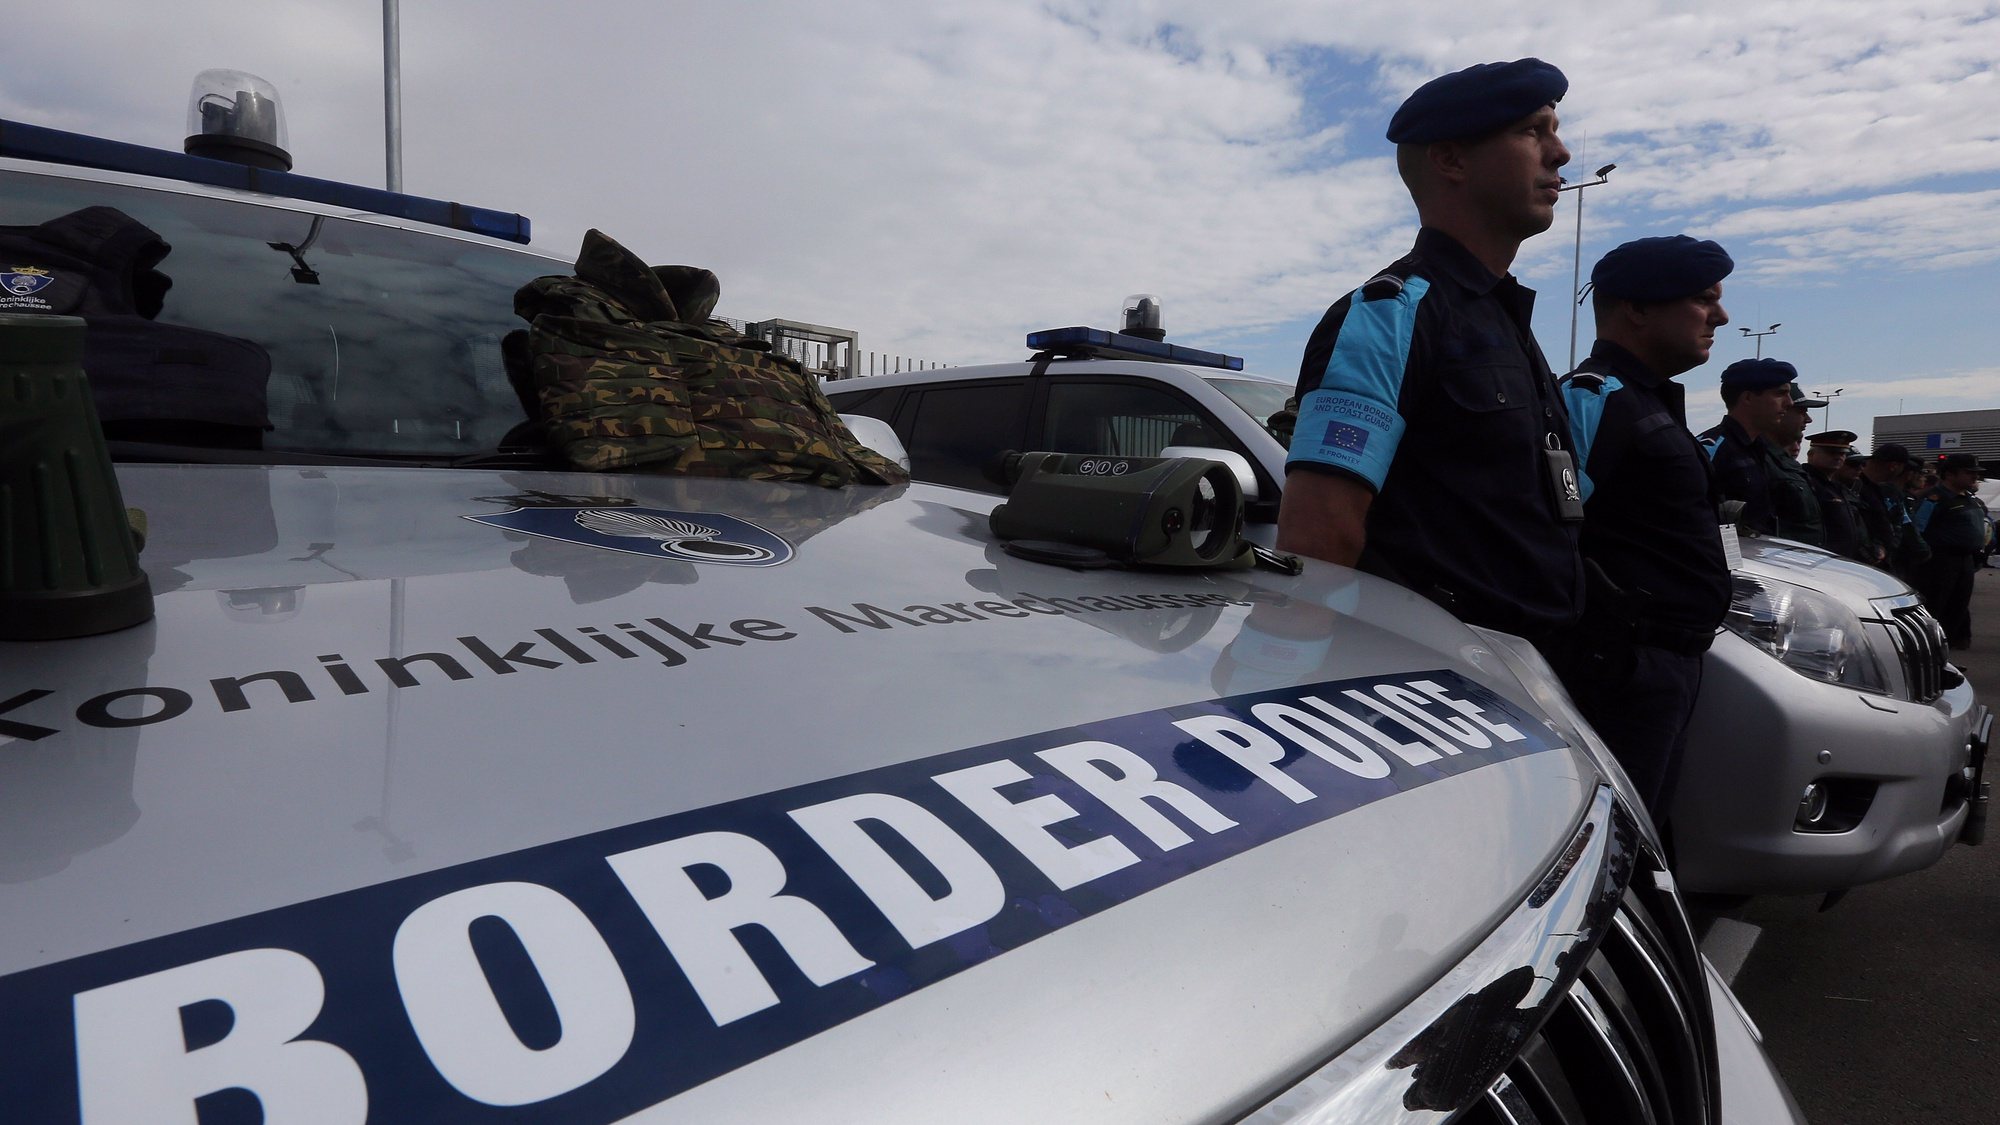 epa07468431 (FILE) - Police officers of European Border and Coast Guard stand on duty, during the official launch of the European Border and Coast Guard, in Kapitan Andreevo Check Point, on the borders of Bulgaria with Turkey, 06 October 2016 (reissued 28 March 2019). To protect Europe&#039;s external borders, the EU&#039;s Frontex border patrol force is to be expanded to up to 10,000 troops by 2027, according to announcements by participants in the negotiations between EU states and the European Parliament on 28 March 2019.  EPA/ORESTIS PANAGIOTOU